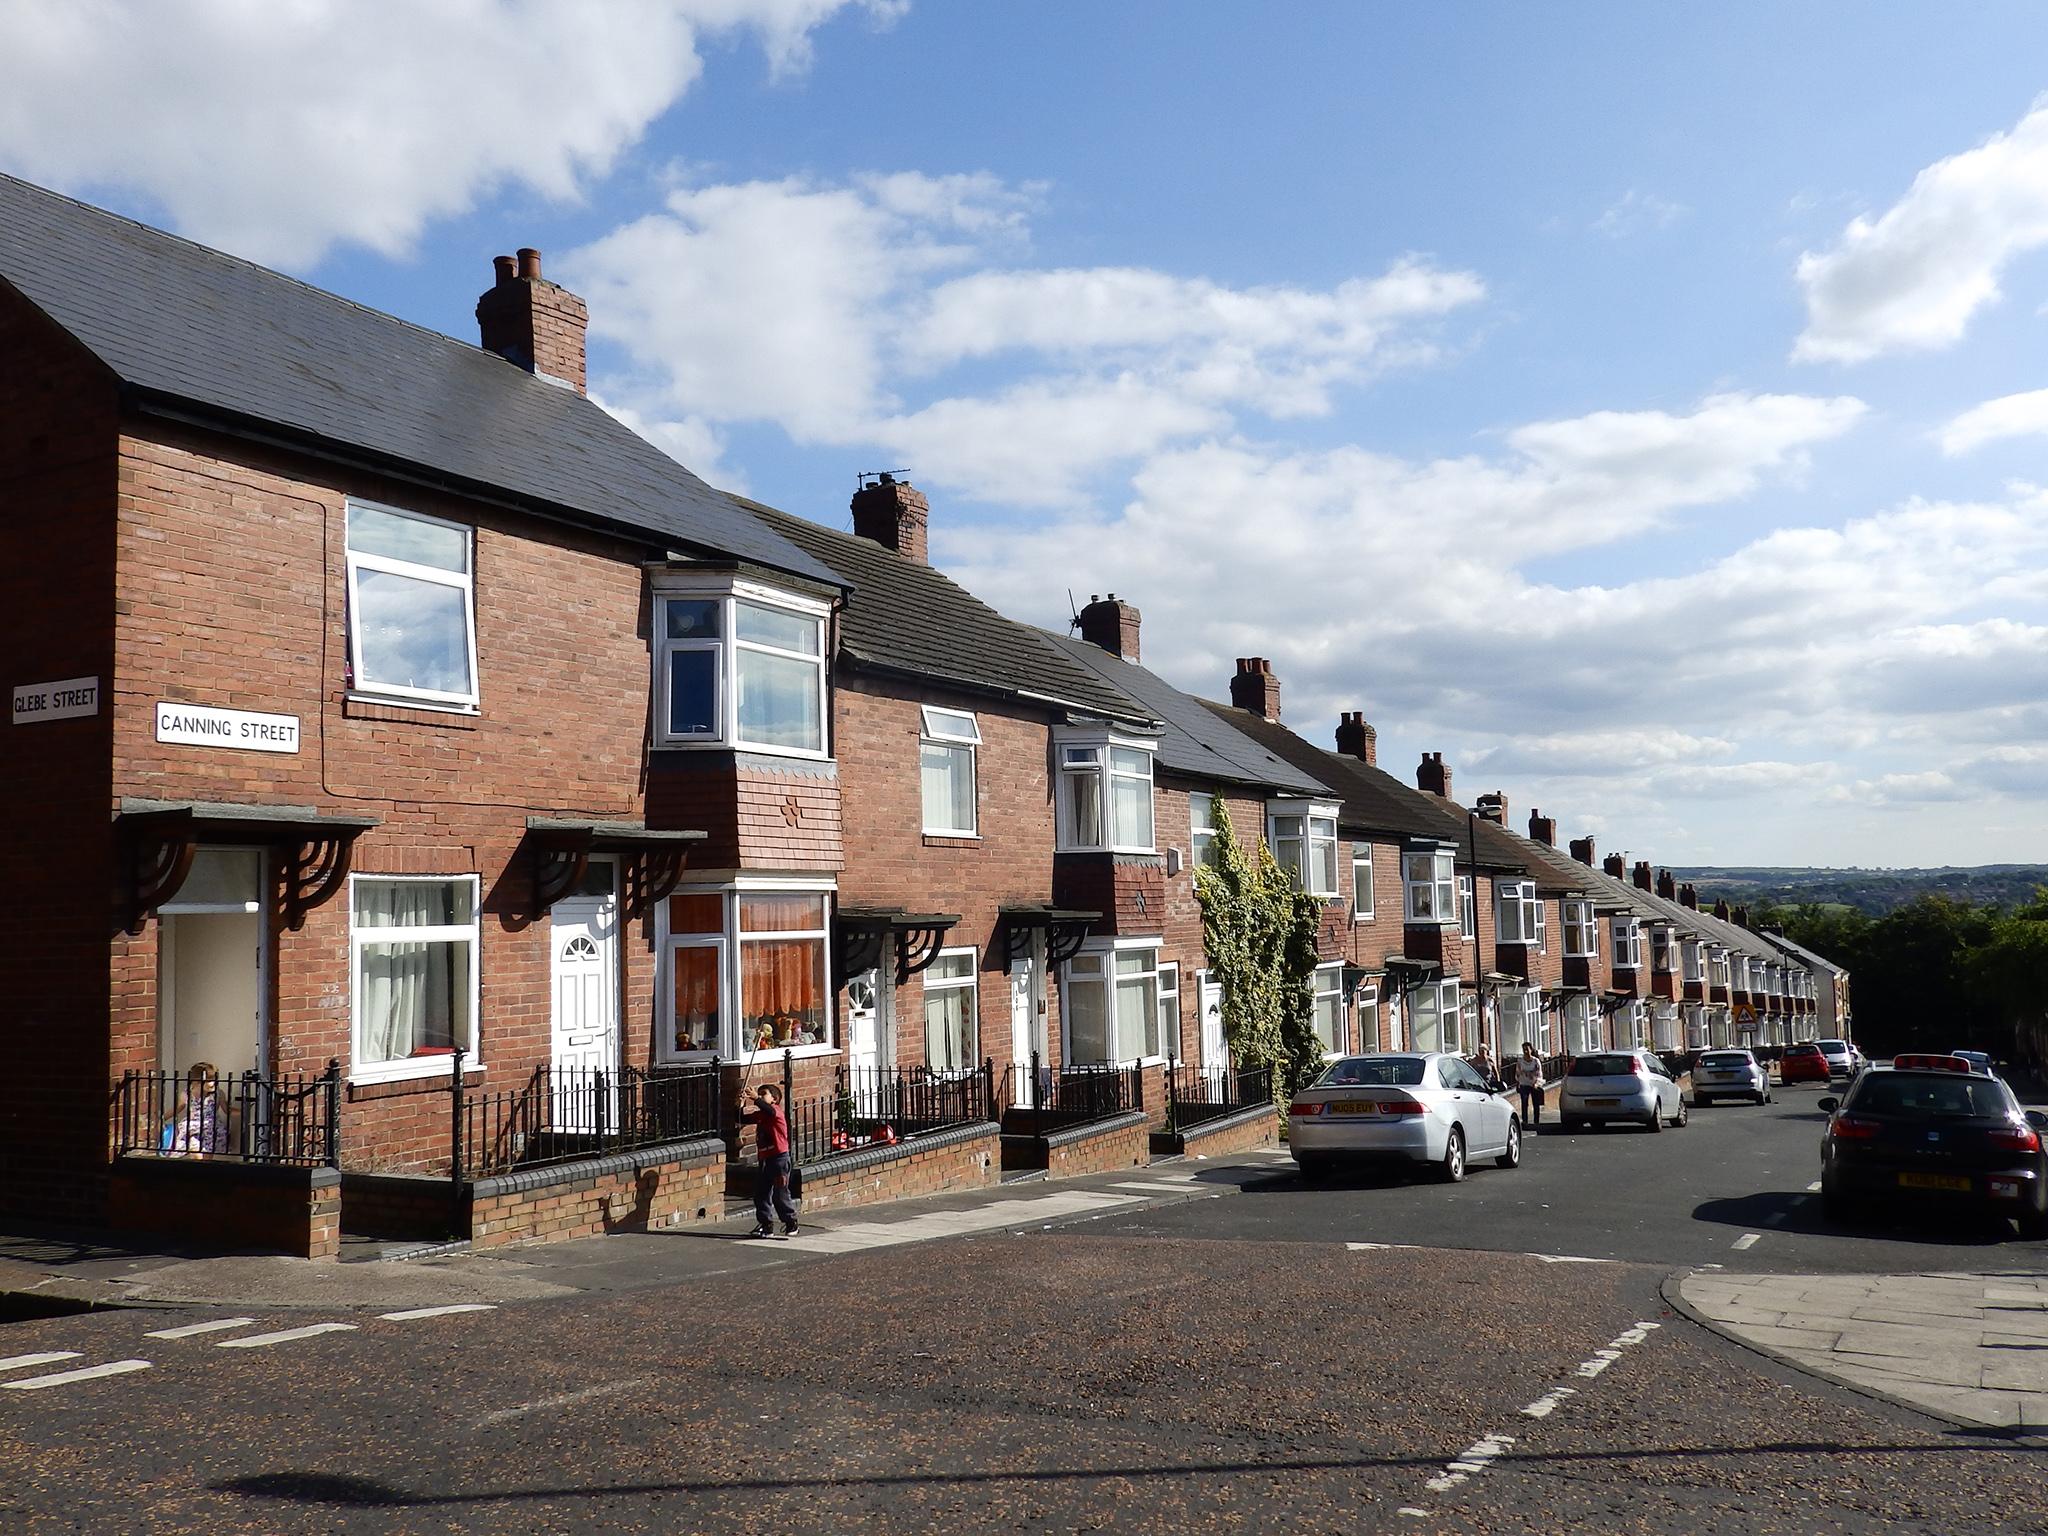 Canning Street in Newcastle, where grooming gang member Yassar Hussain lived